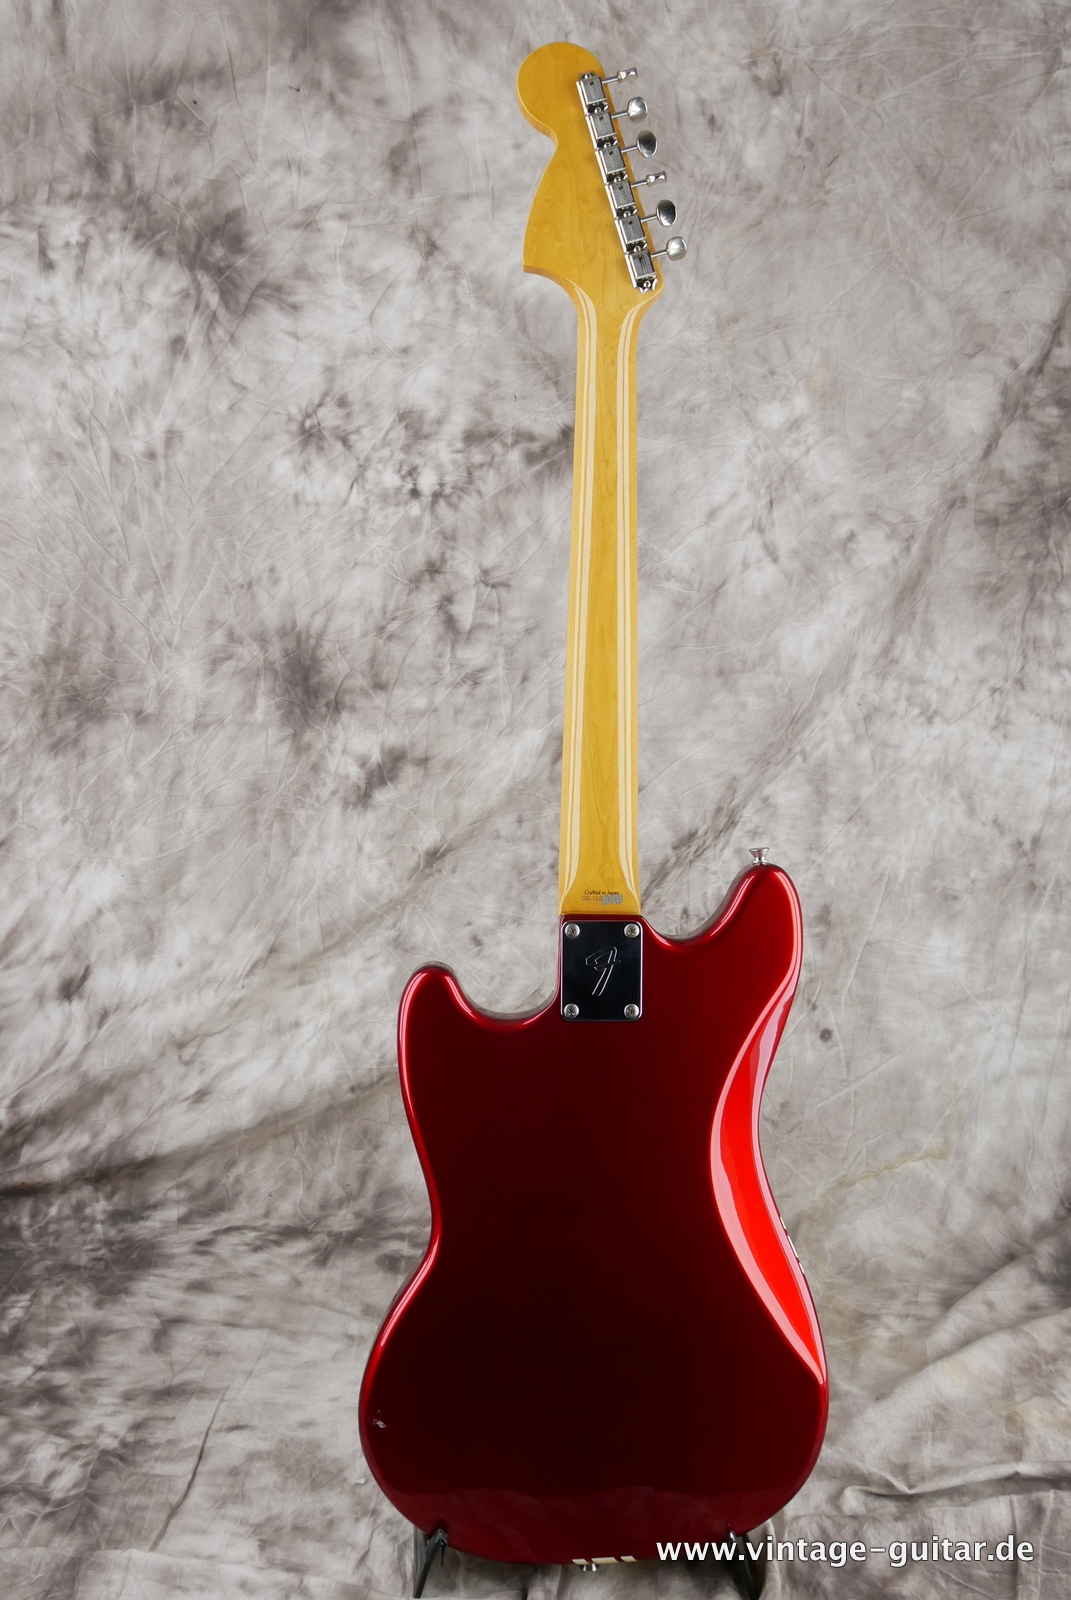 Fender_Mustang_competition_70s_RI_candy_apple_red_Japan_2002-002.JPG